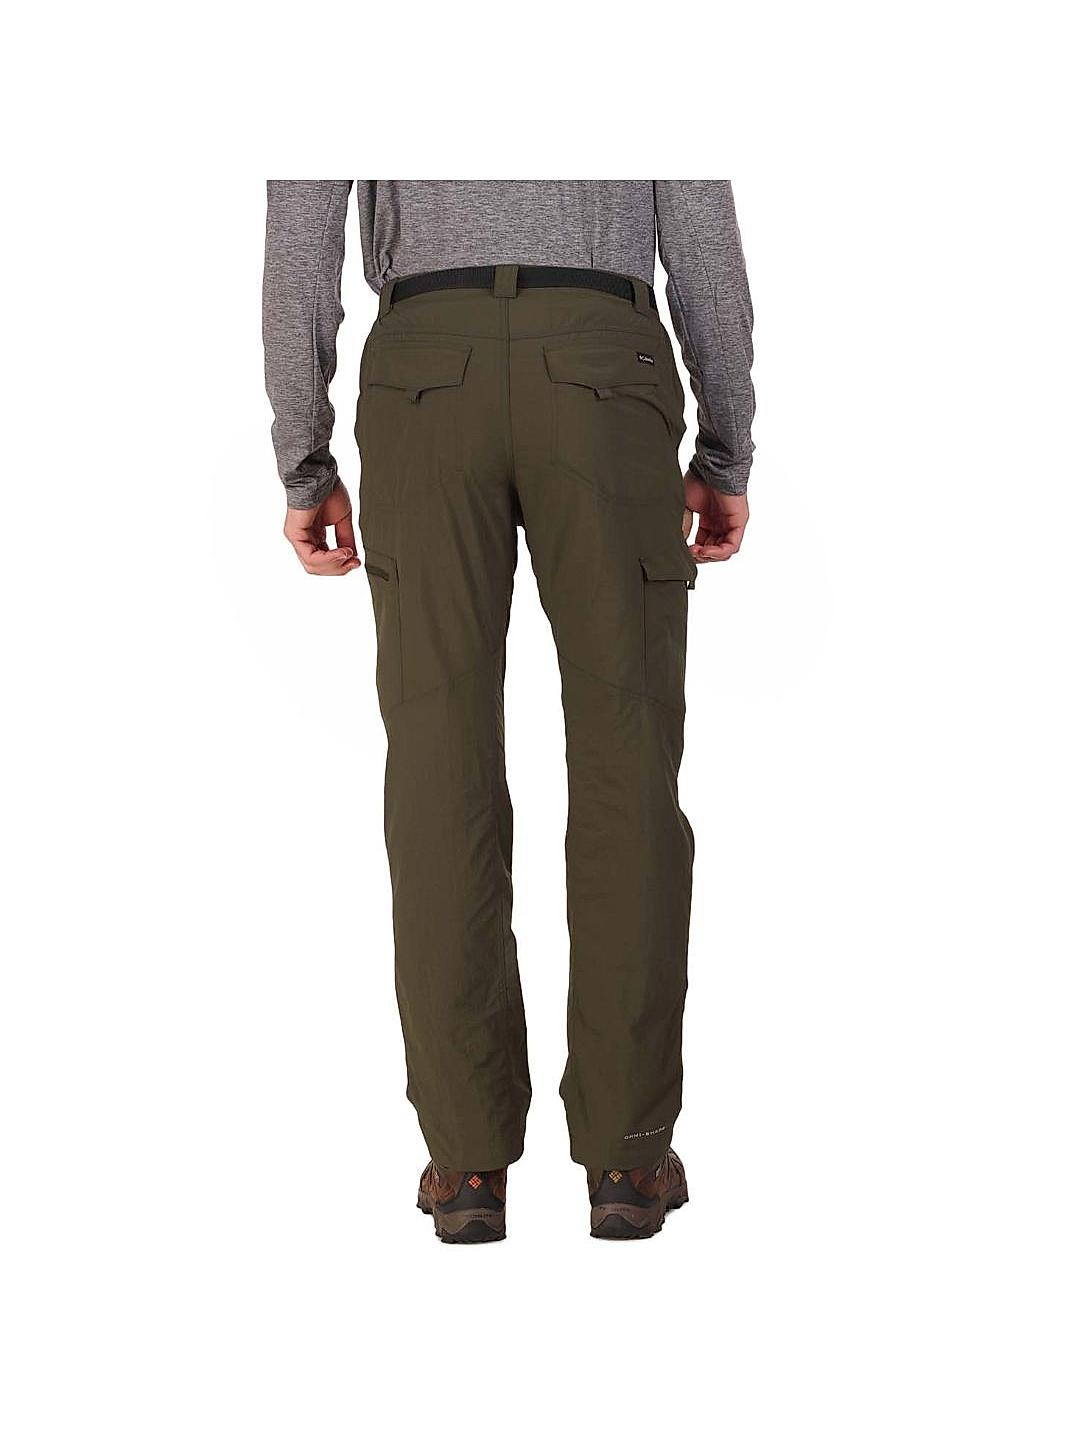 Olive Green Cargo Baggy Fit Pant For Mens – Drippy Dudes